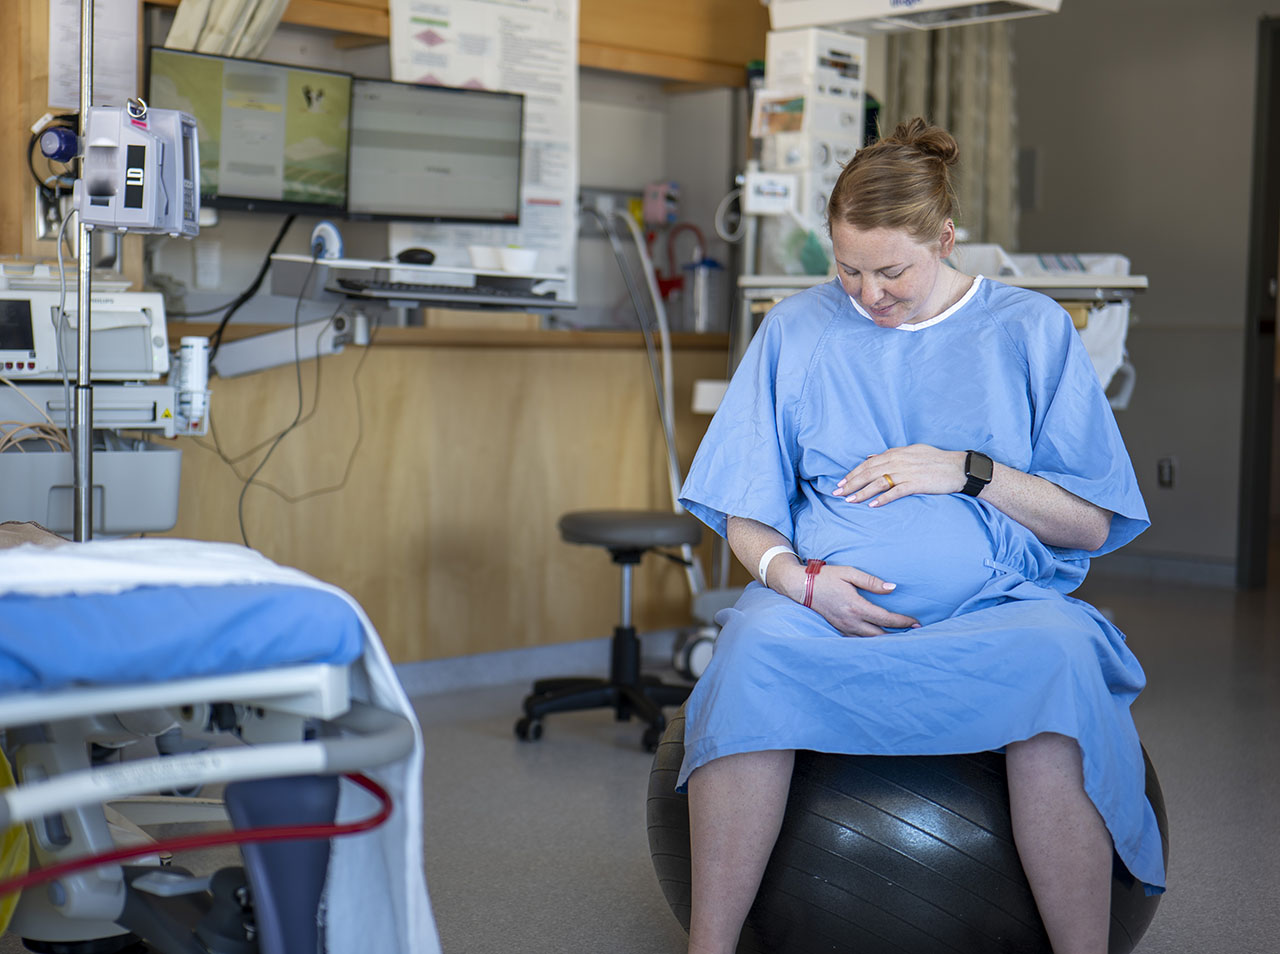 https://www.jeffersonhealth.org/content/dam/health2021/images/photos/stock/people/clinical/woman-in-labour-on-a-birthing-ball.jpg